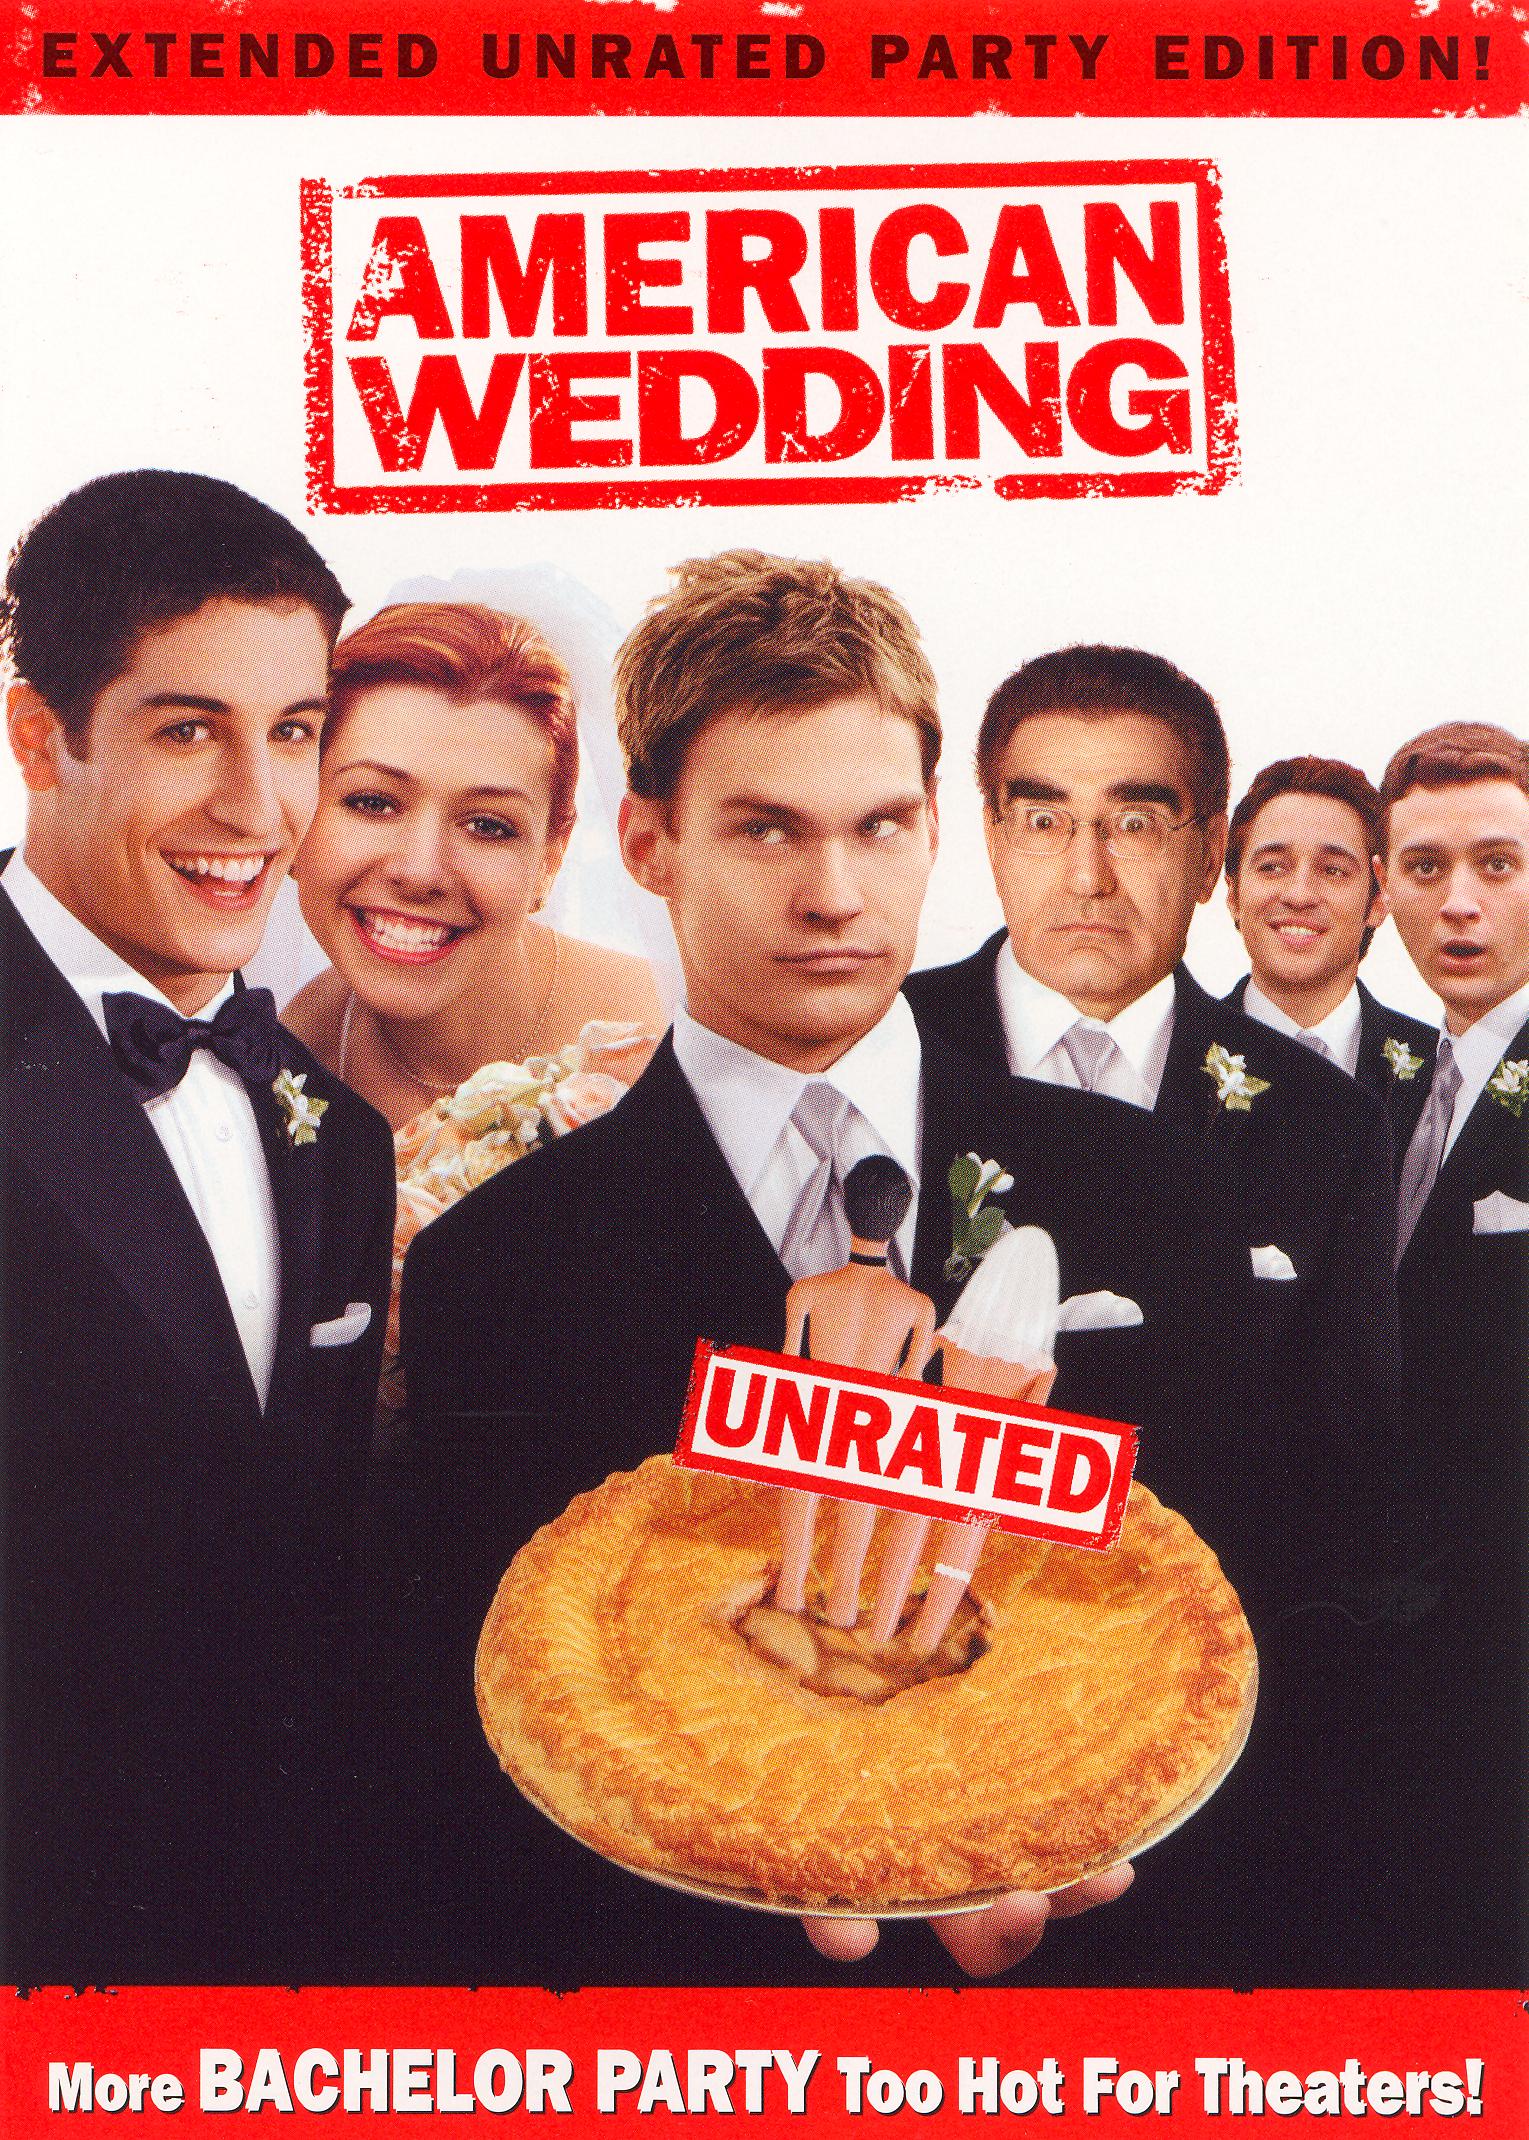 American Wedding [WS] [Extended Party Edition] [Unrated] cover art